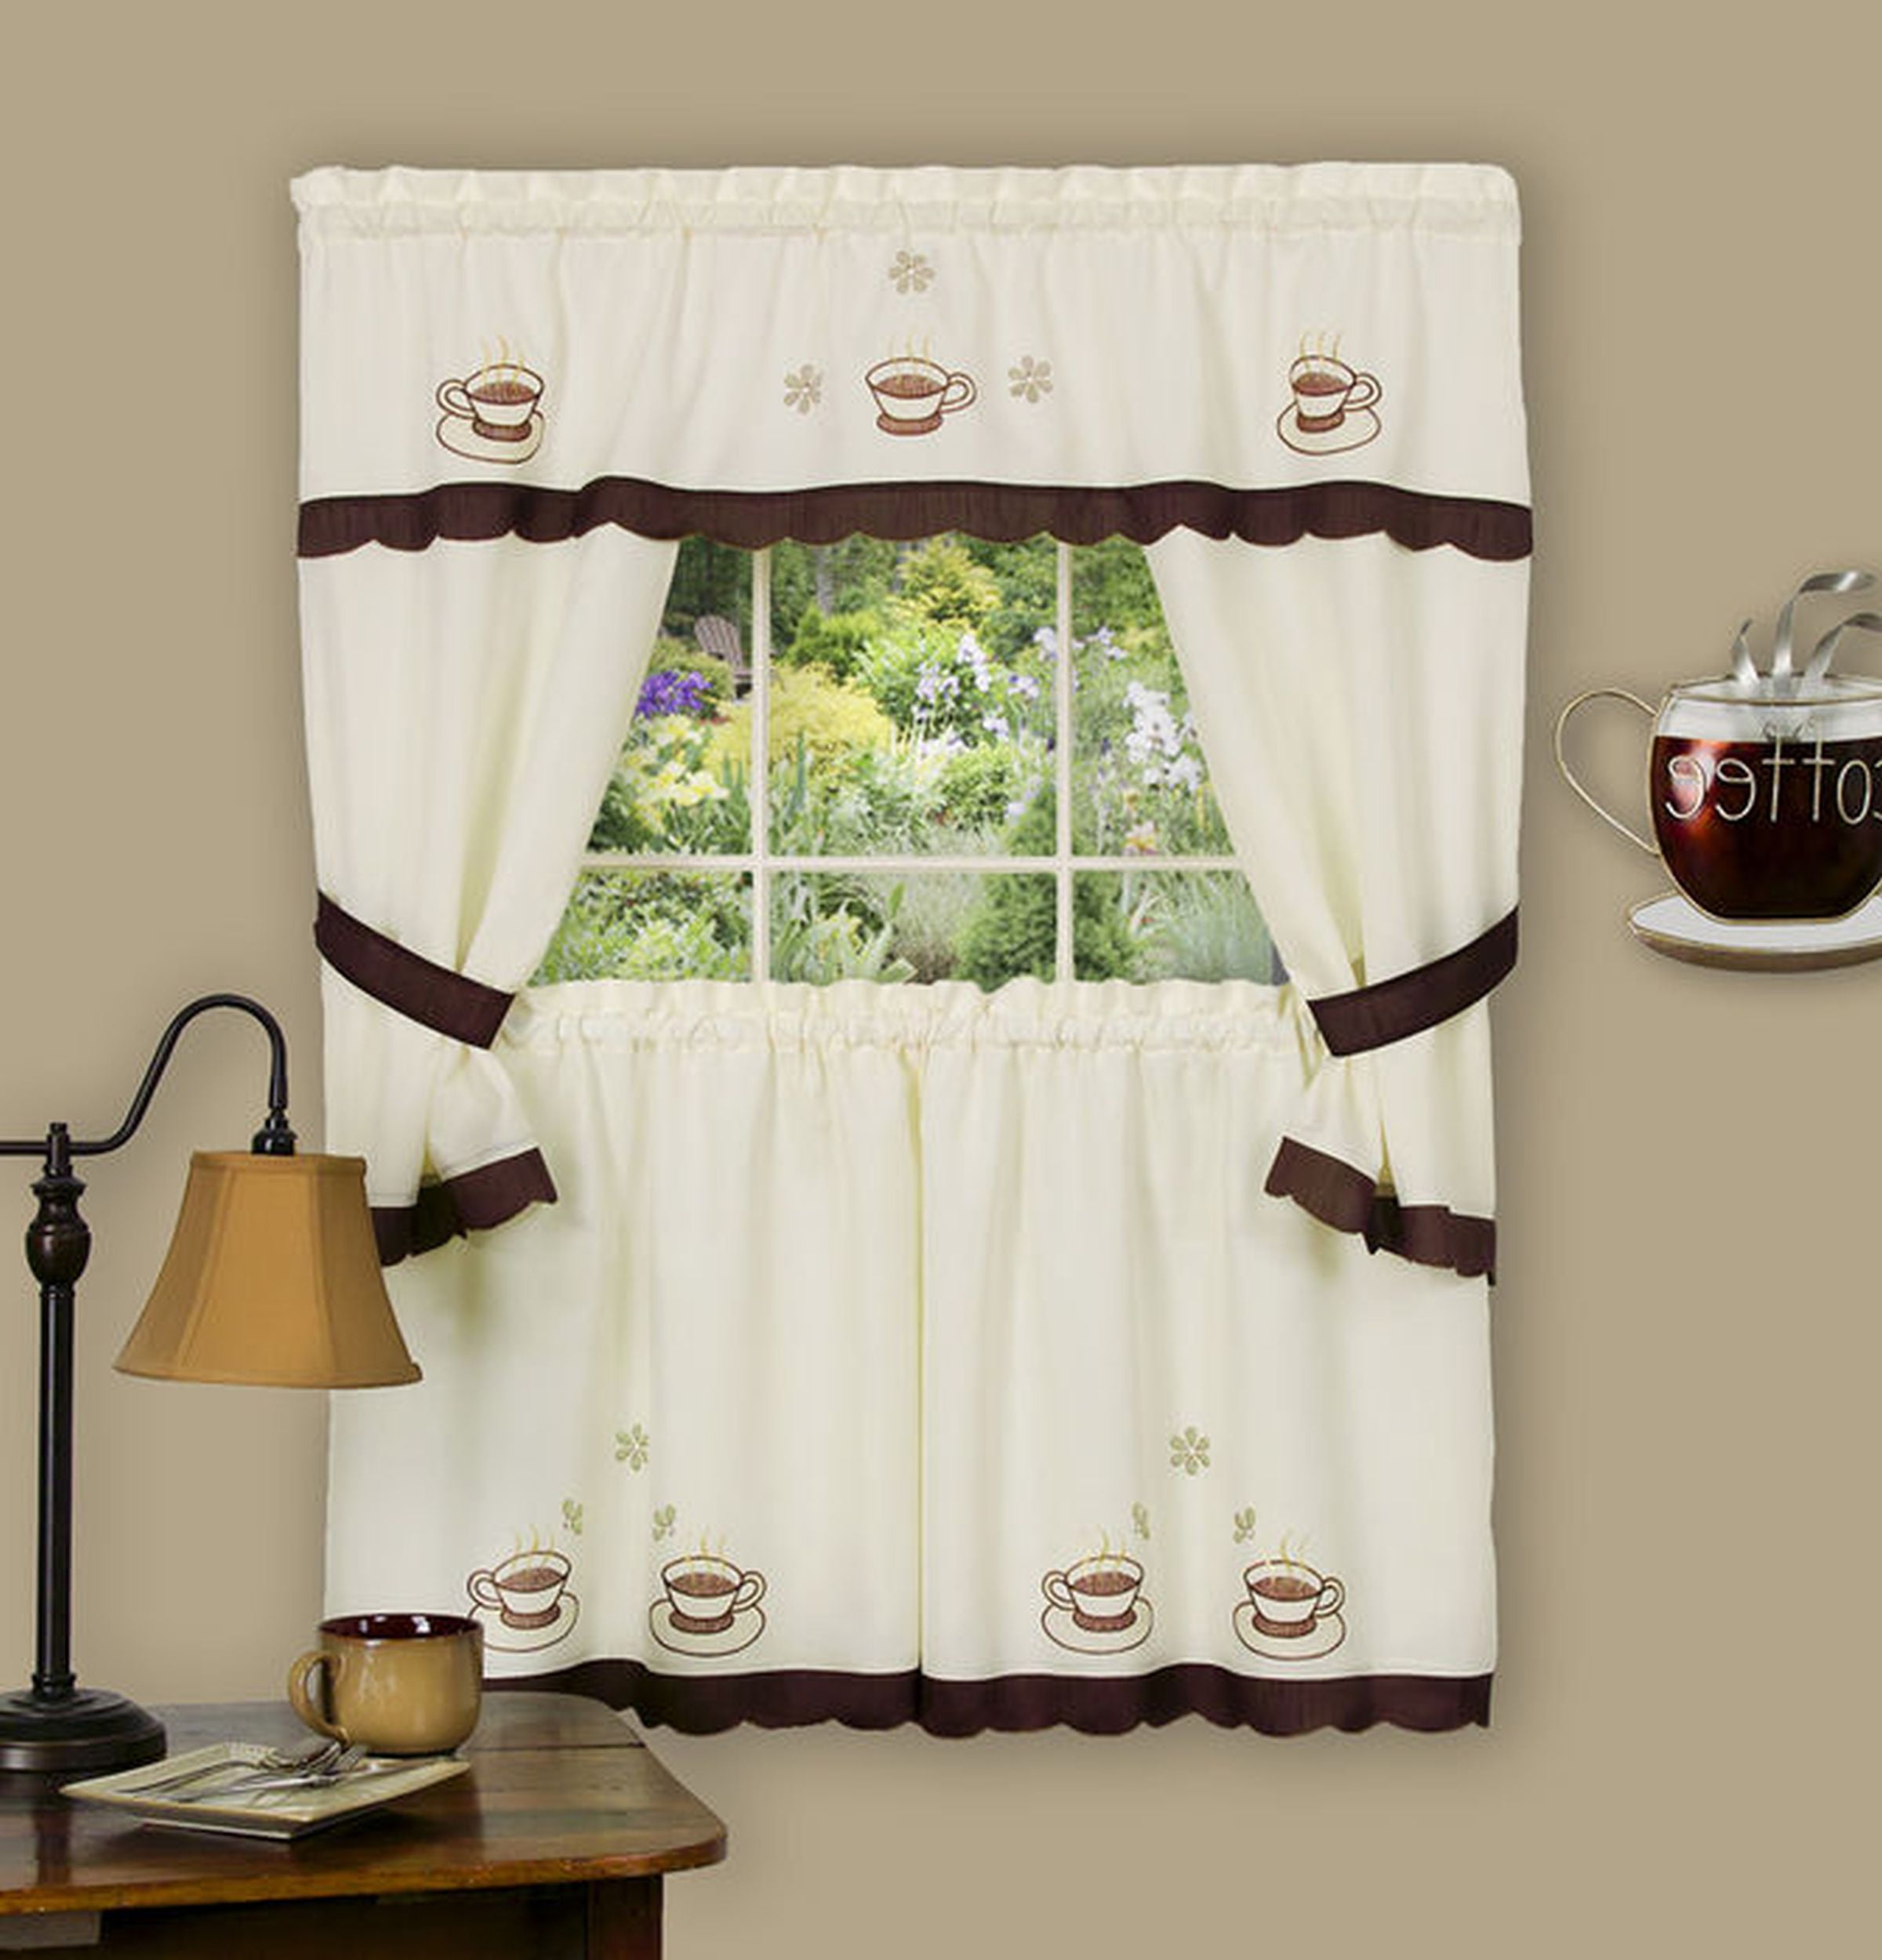 Daisy Meadow Embellished Cottage Window Curtain Set 58x36 